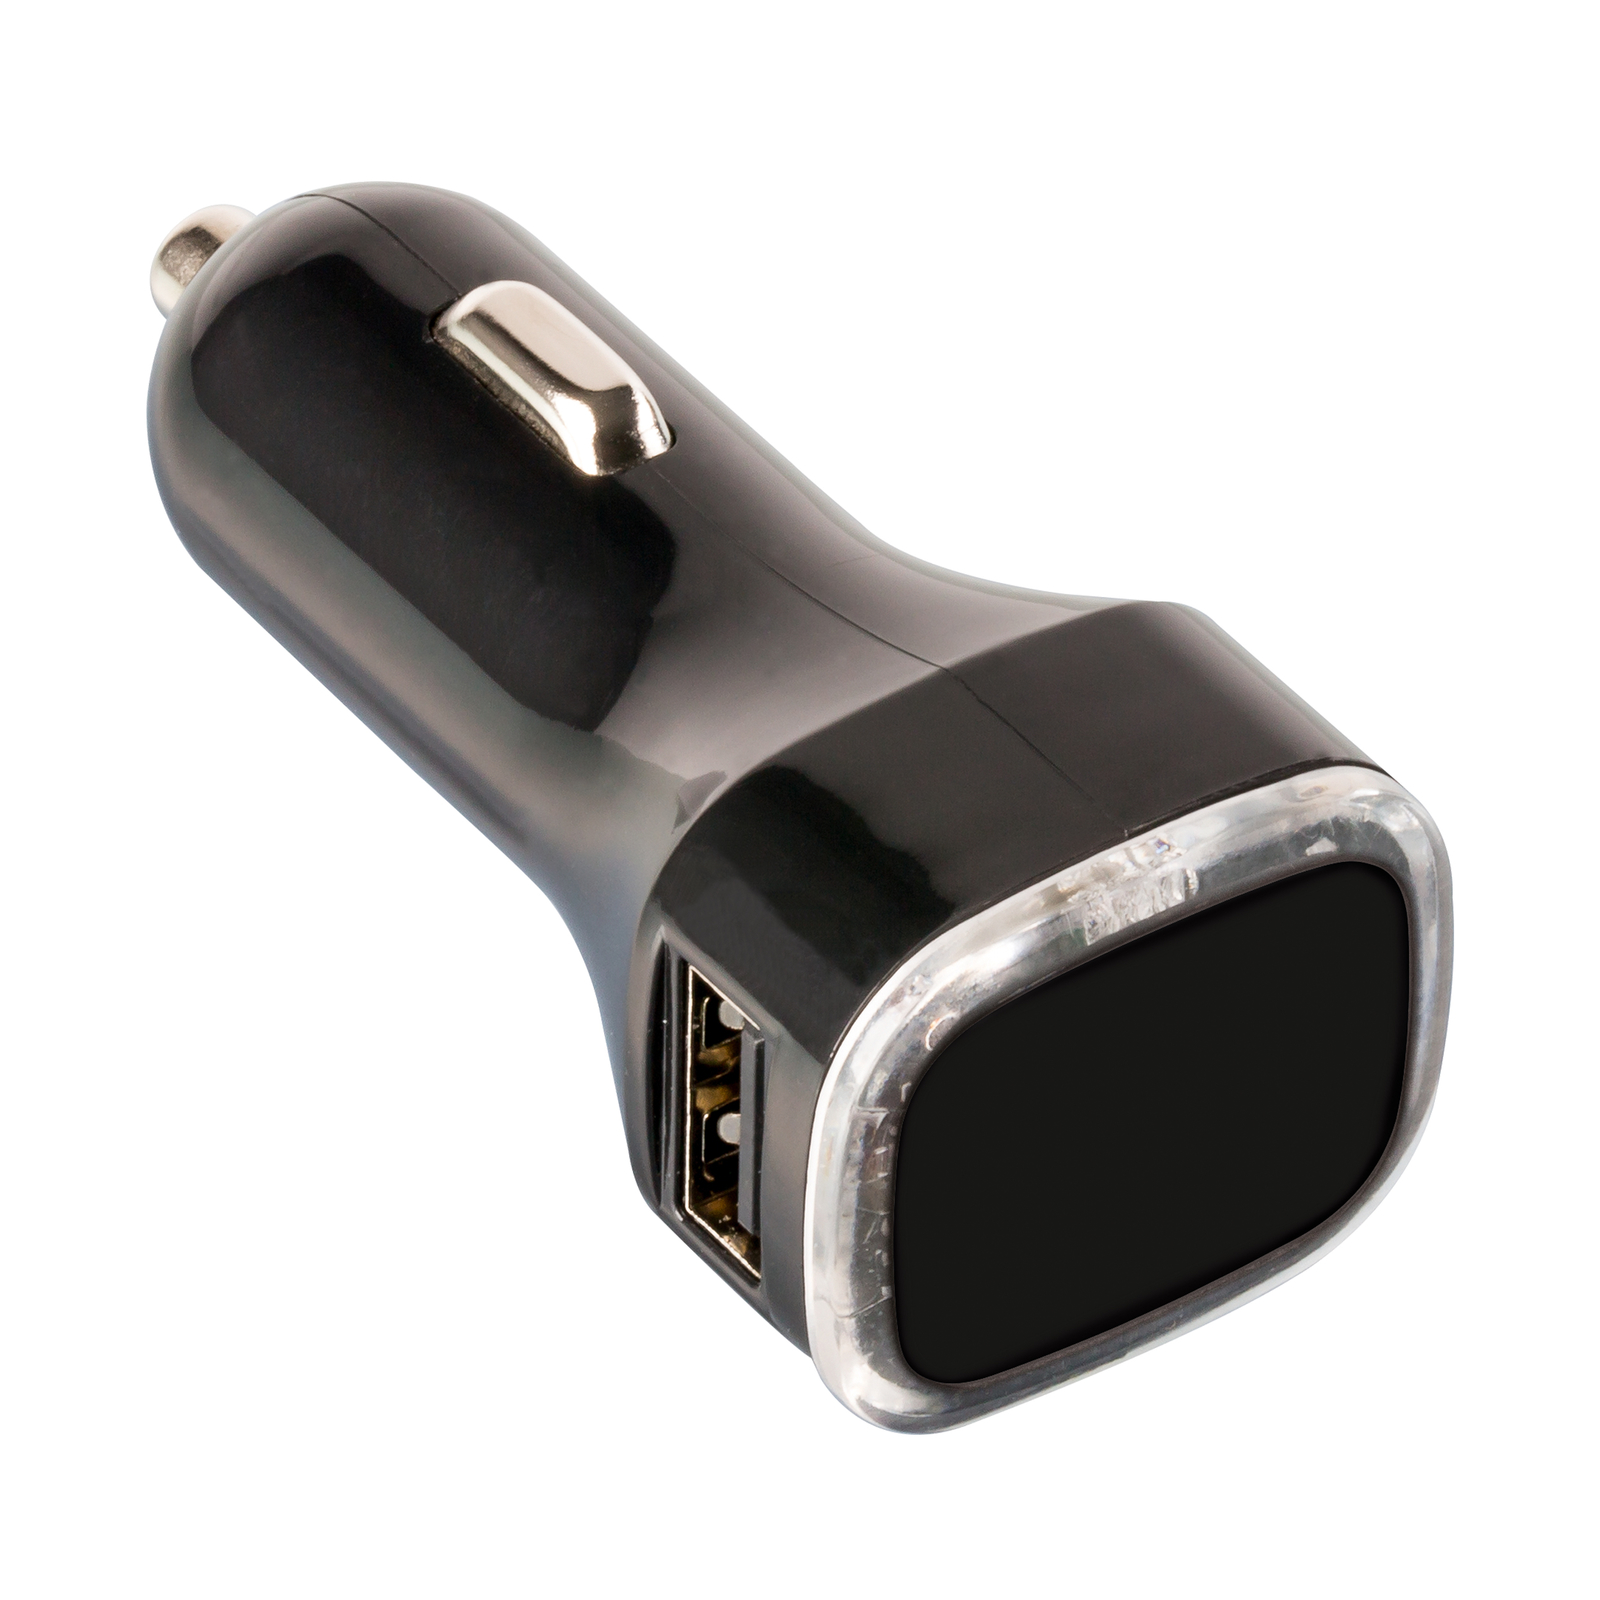 Personalised USB car charger adapter RC 500